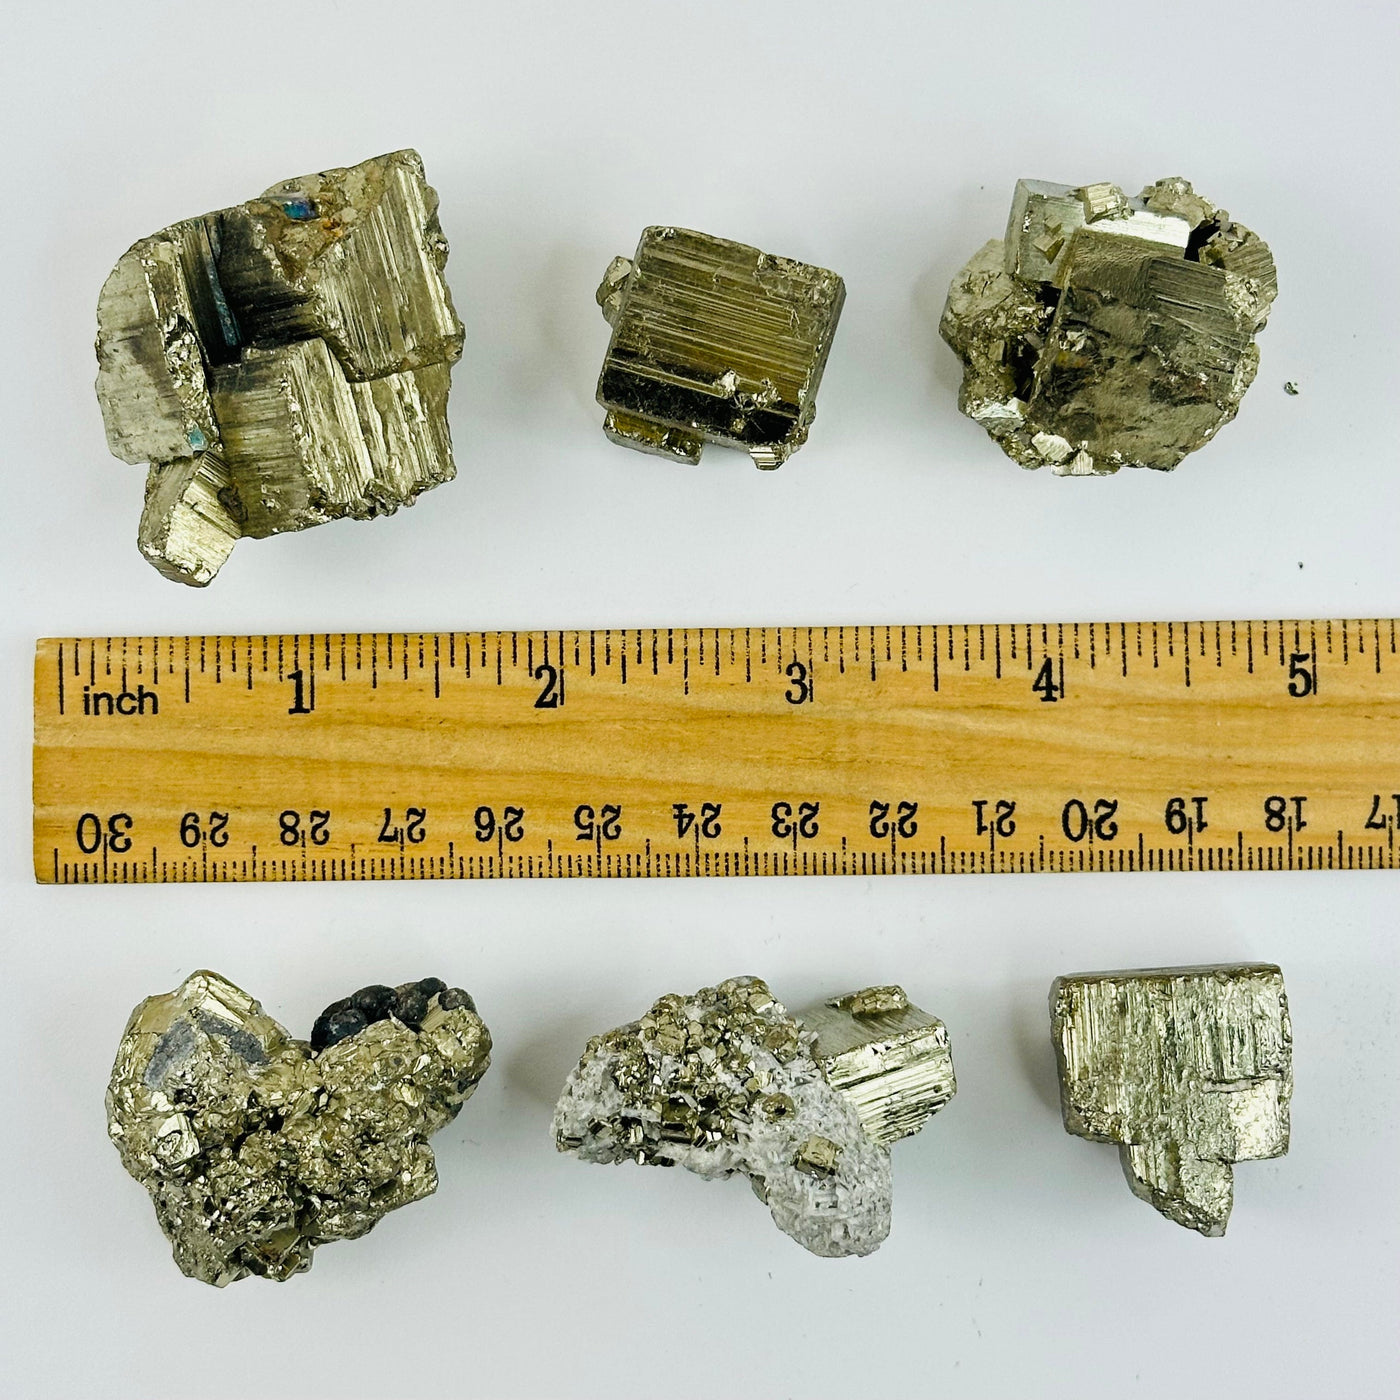 Pyrite Clusters - Natural Stones - next to a ruler for size reference 